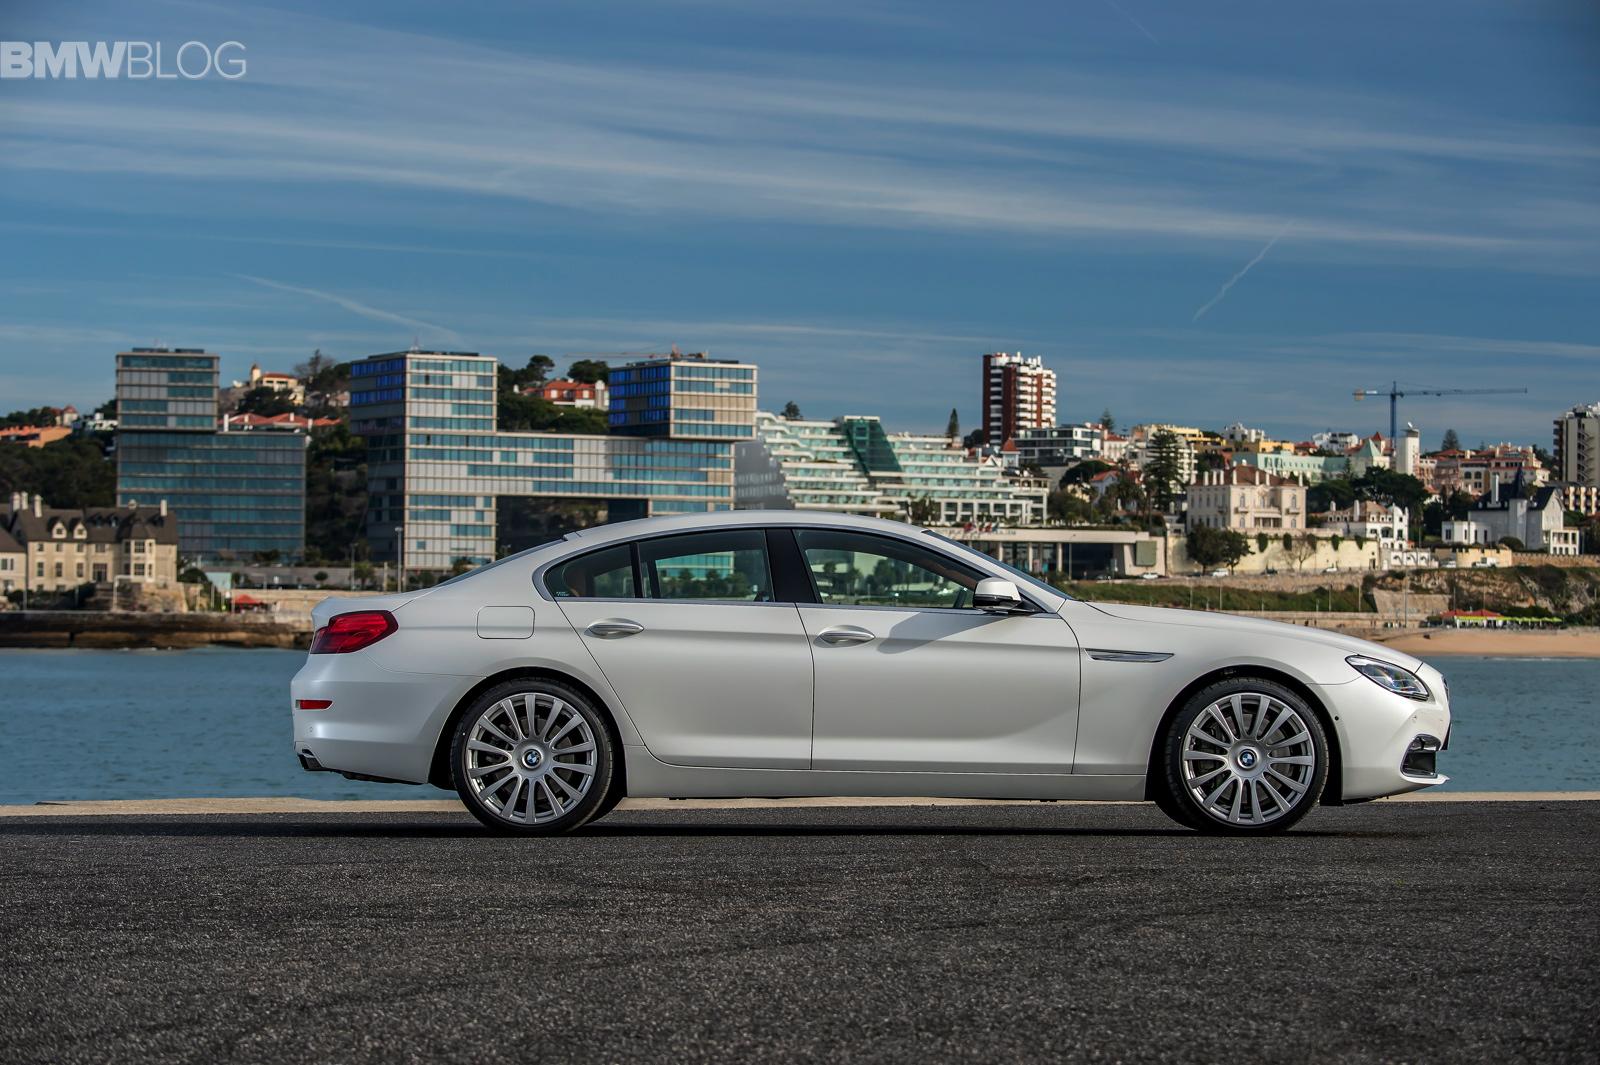 2015 bmw 6 series gran coupe images 26 750x499